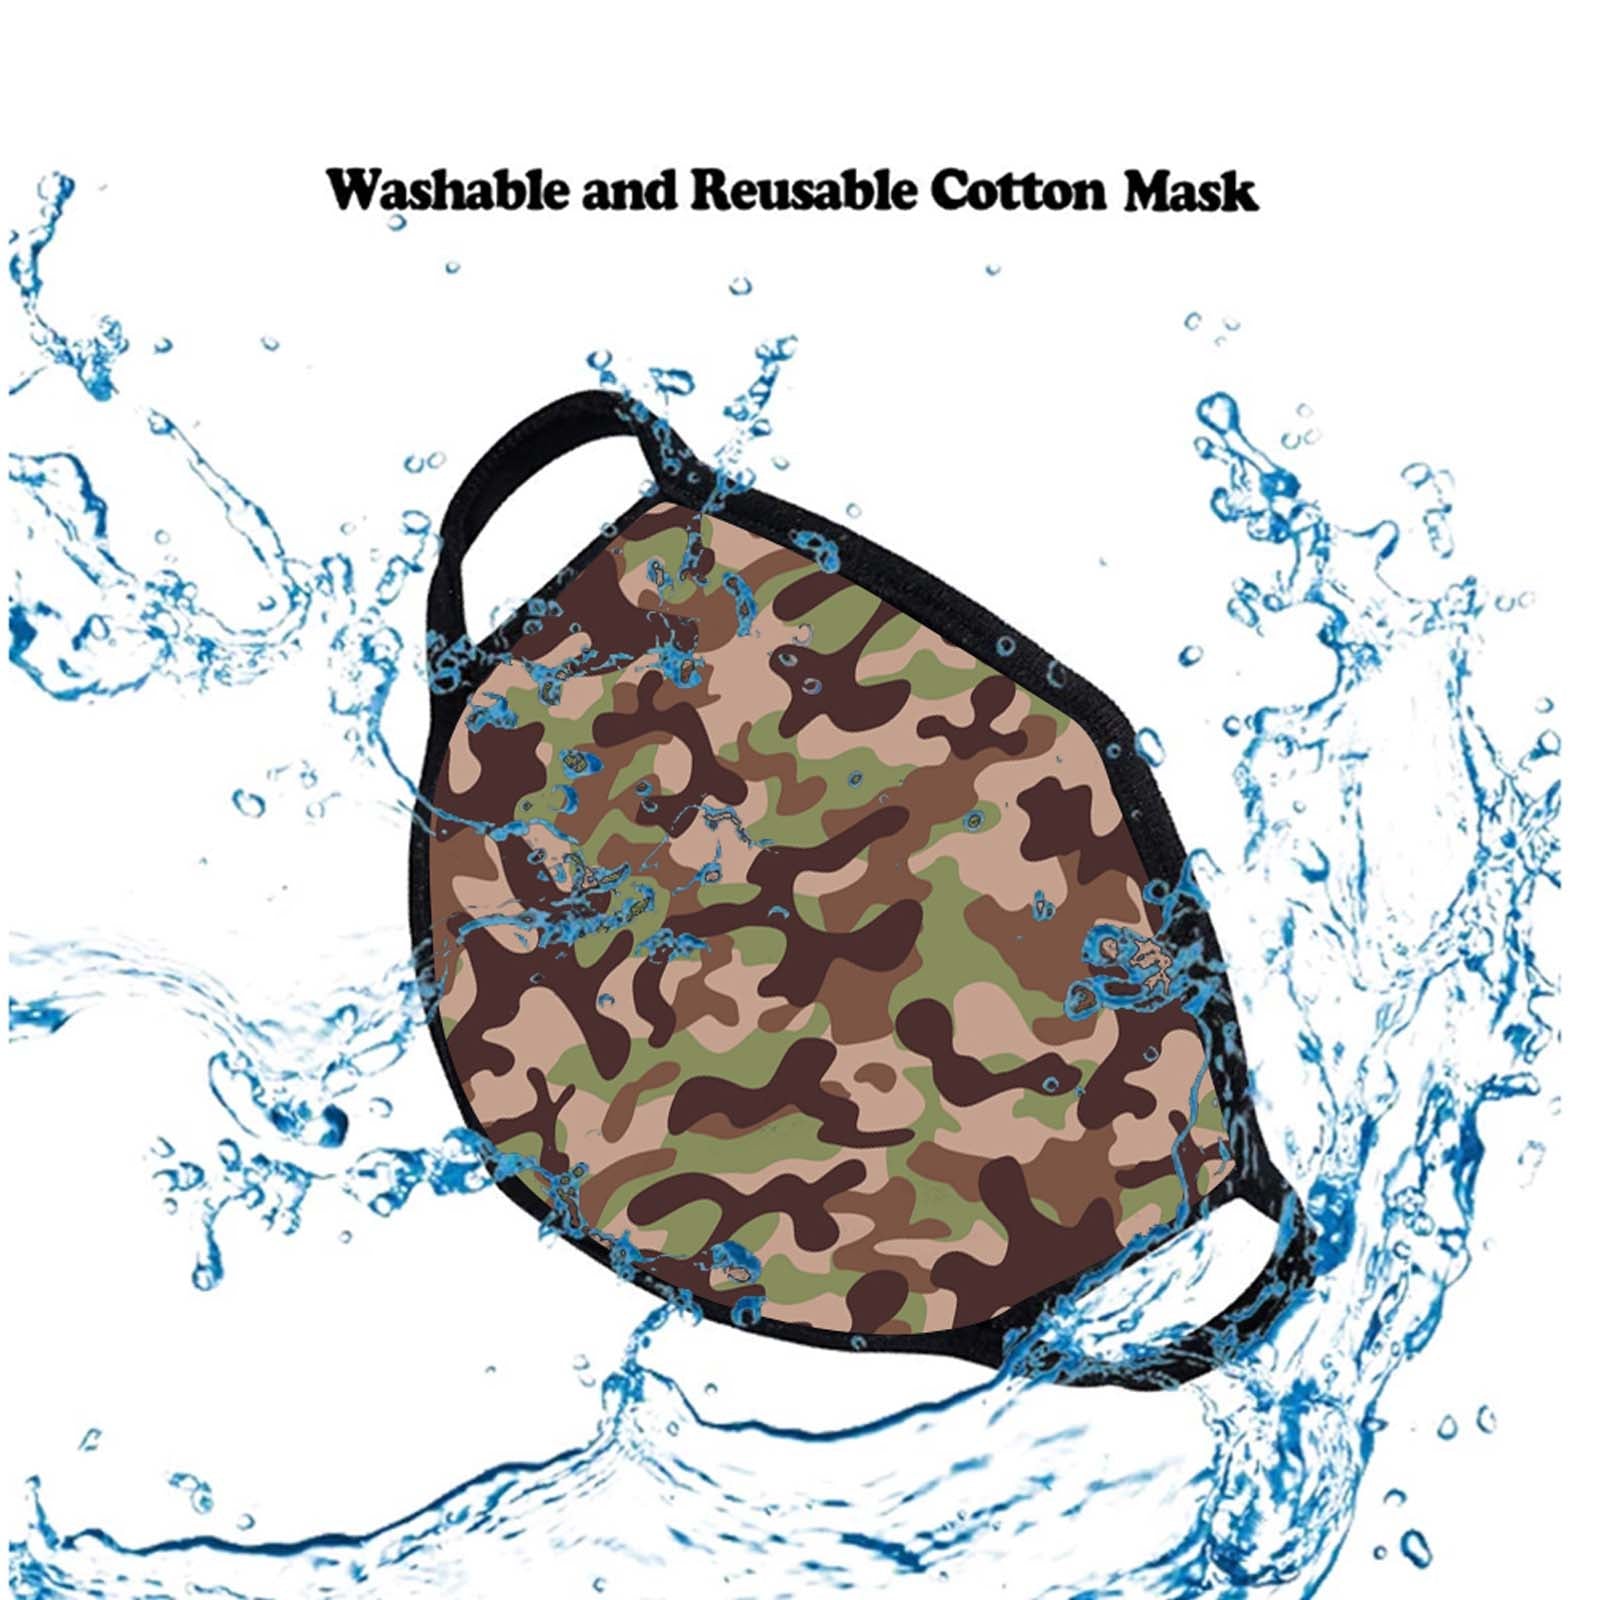 FCM-003 Camo Print Fabric Face Mask Double Layer Set of 2